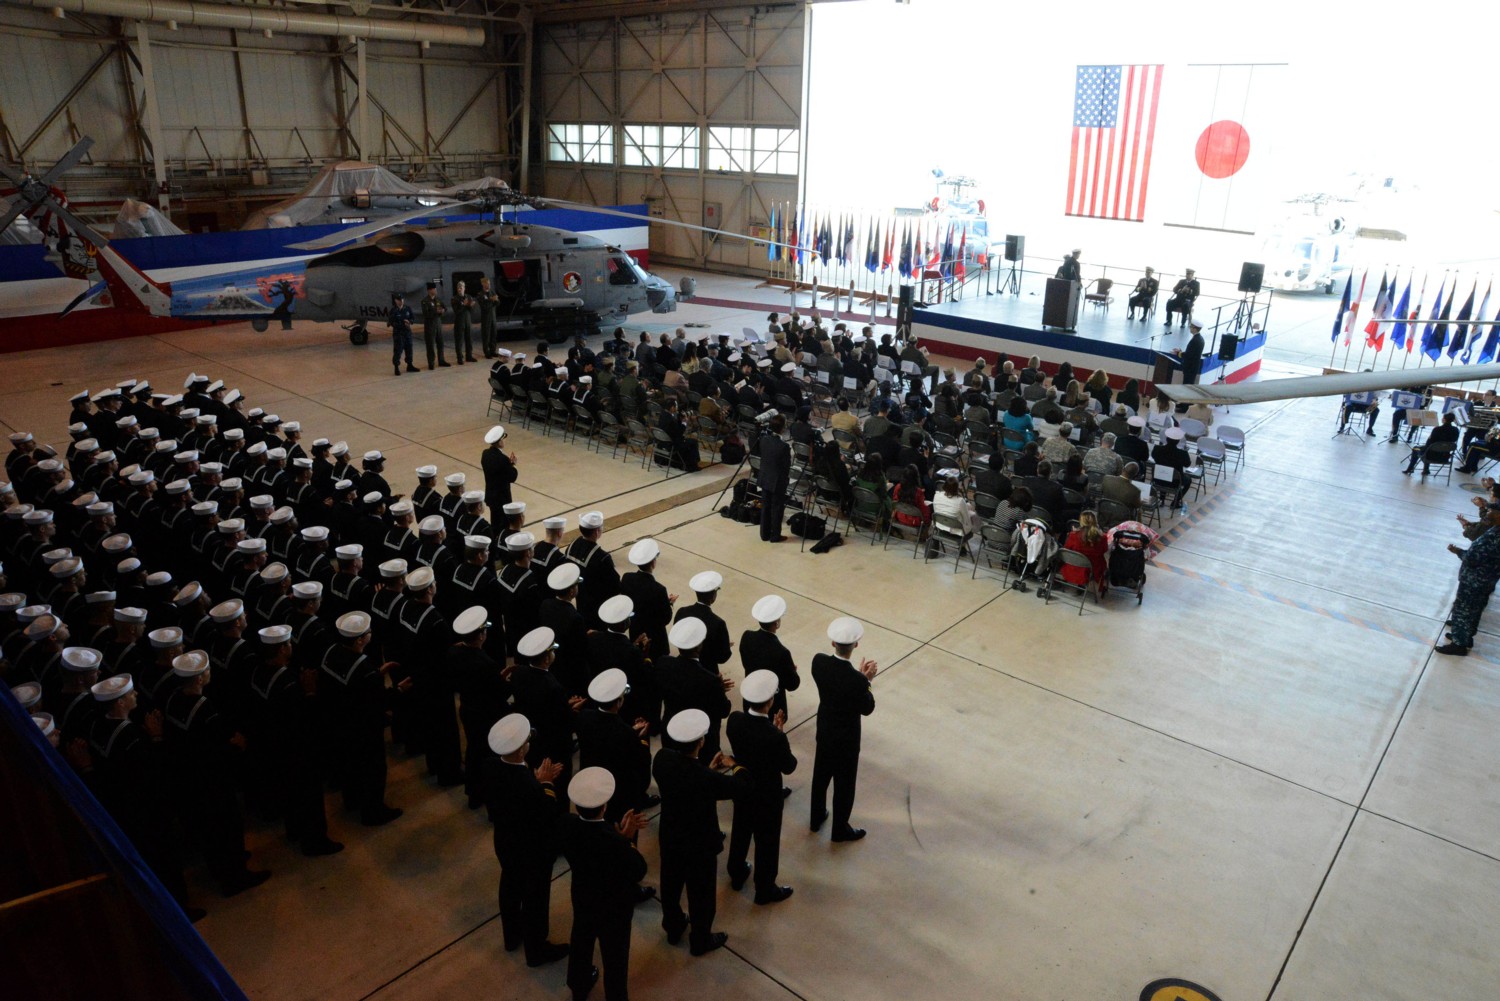 hsm-51 warlords helicopter maritime strike squadron mh-60r seahawk navy 2013 33 transitioning cerremony naf atsugi japan